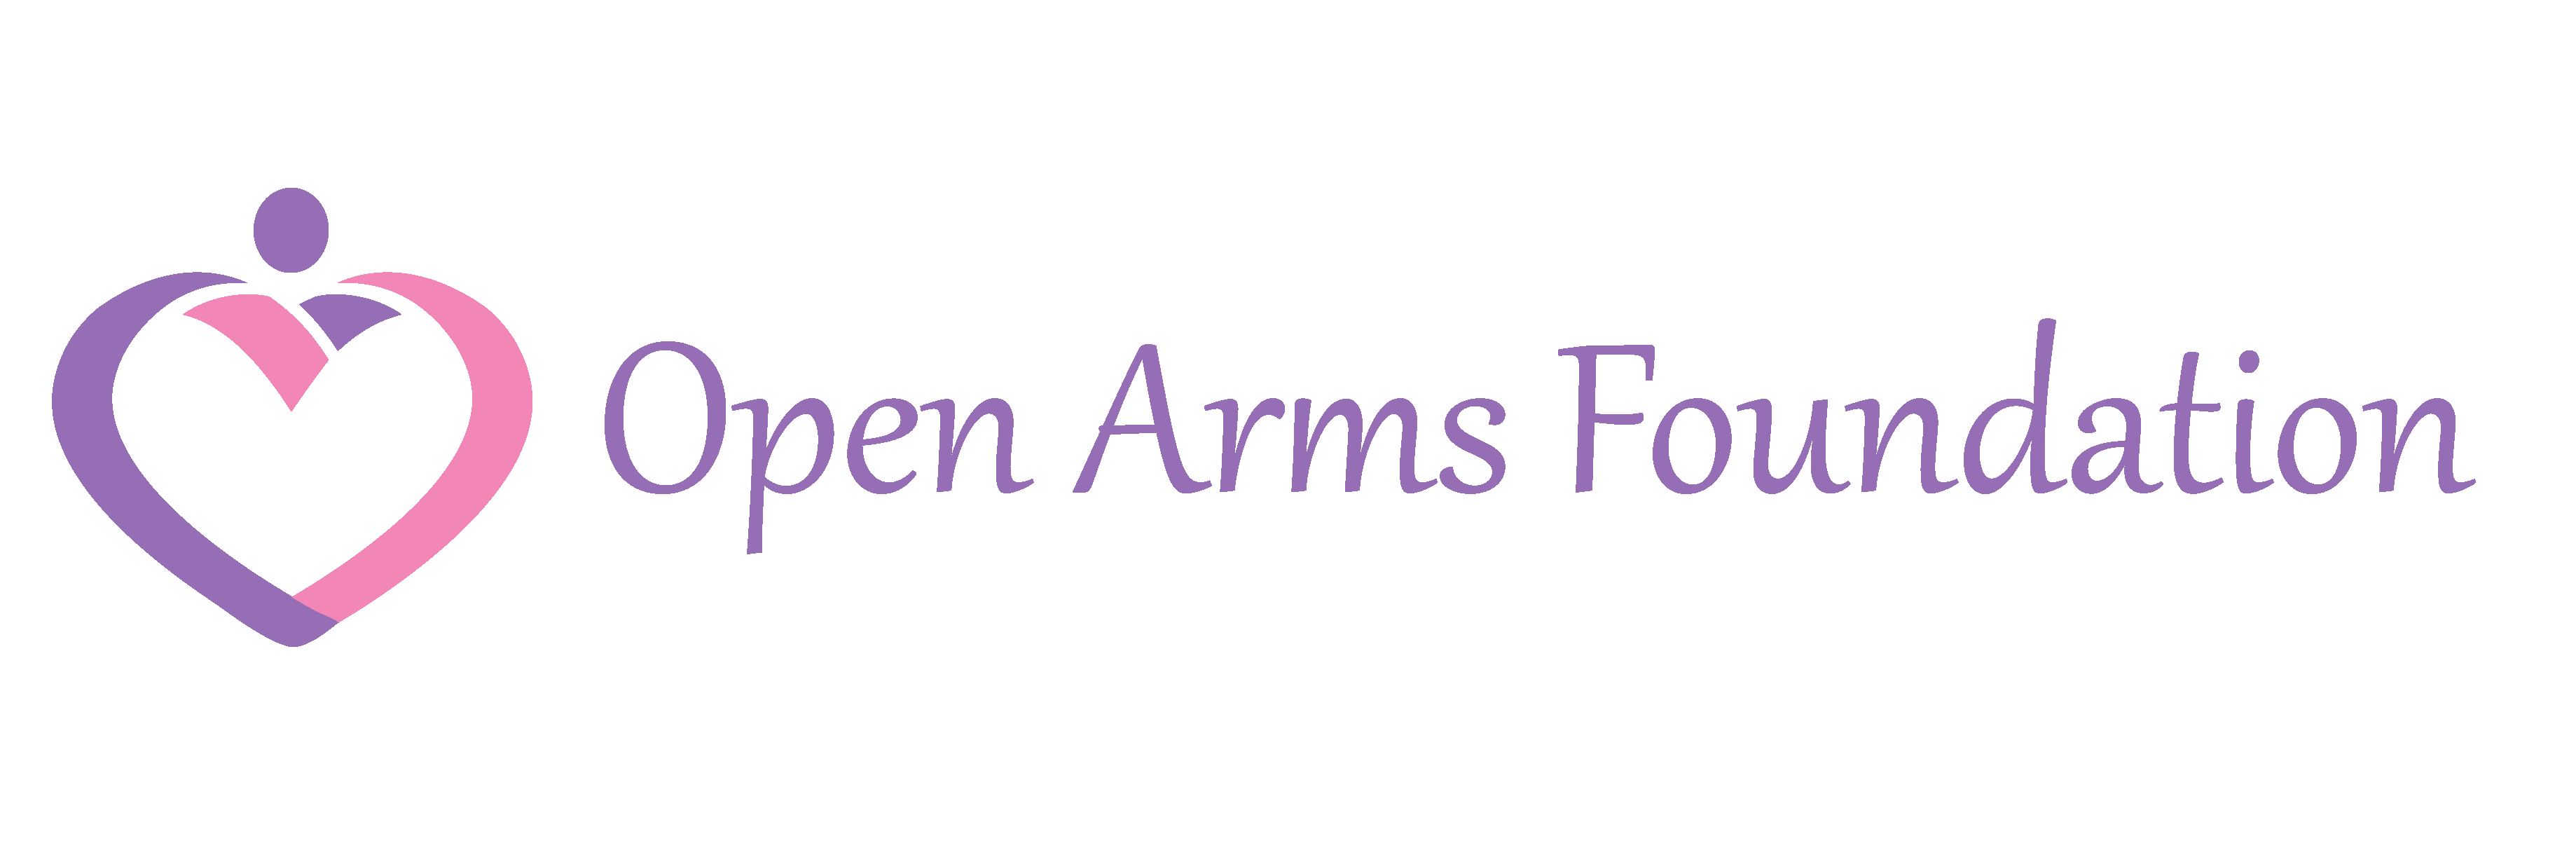 Open Arms Foundation, Inc.